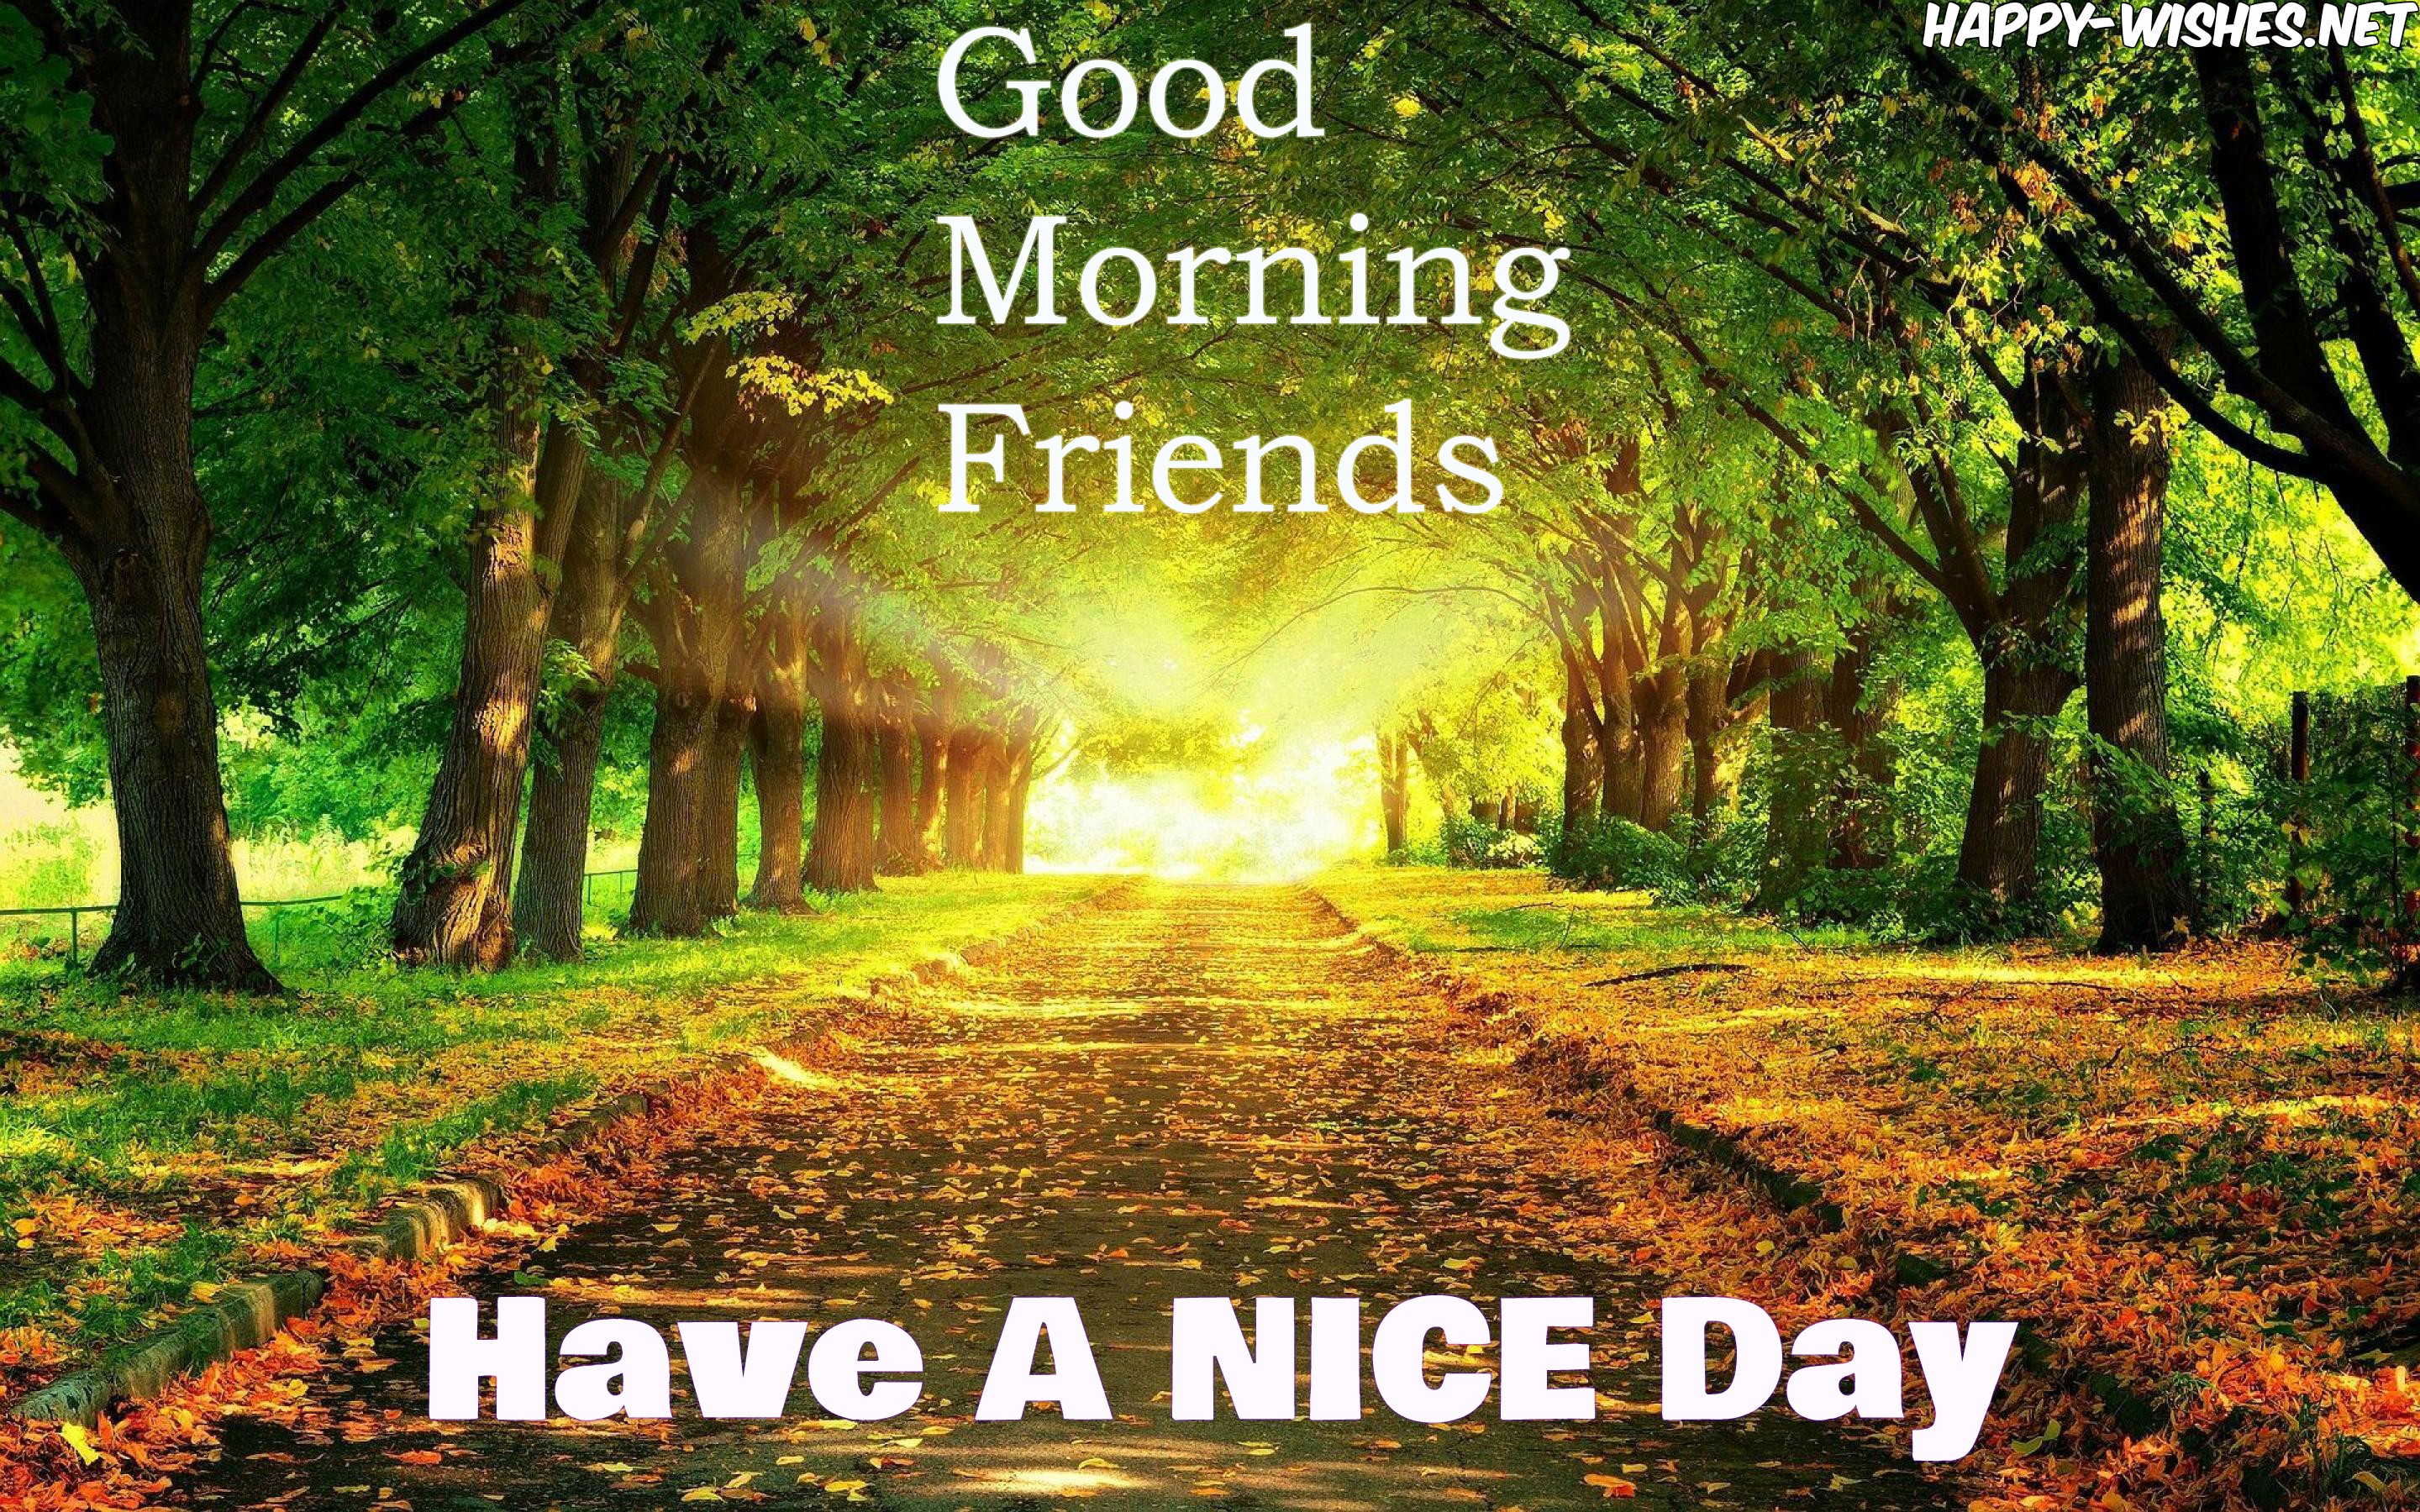 Have a nice day friends